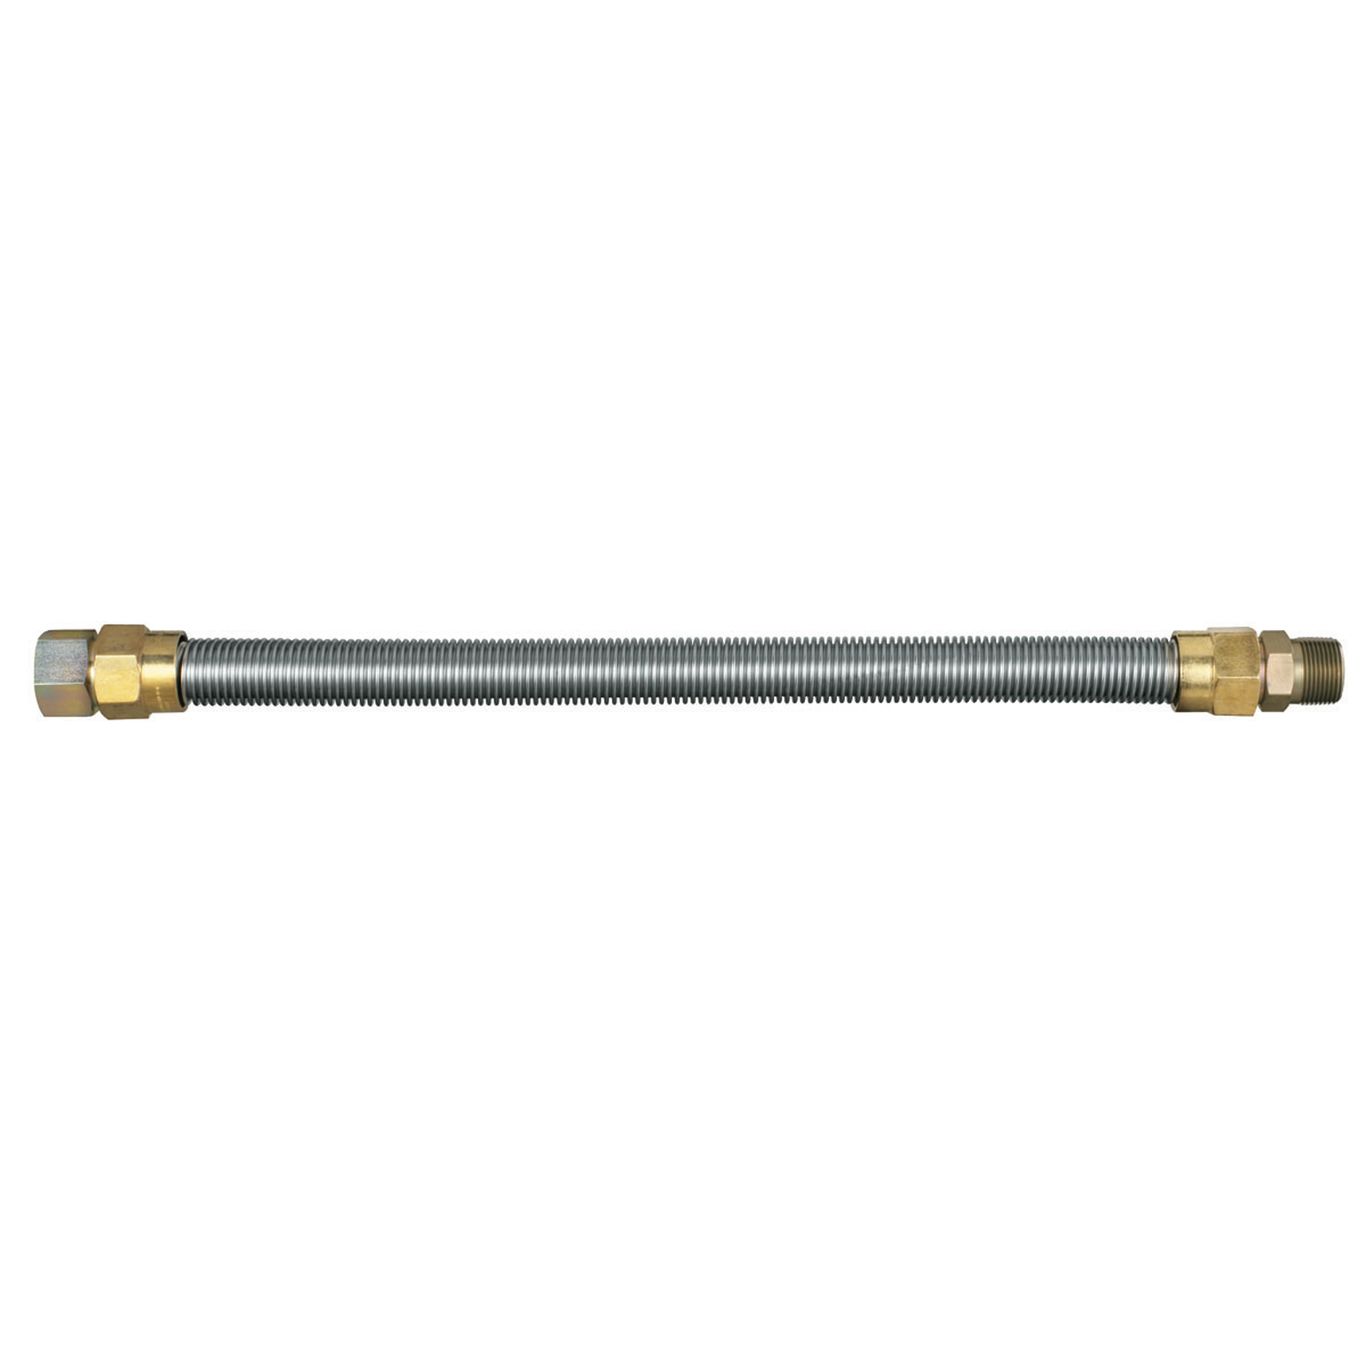 Gas Connector, 3/4 Inch Inner Dia., 3/4 Inch x 3/4 Inch Size, 72 Inch Length